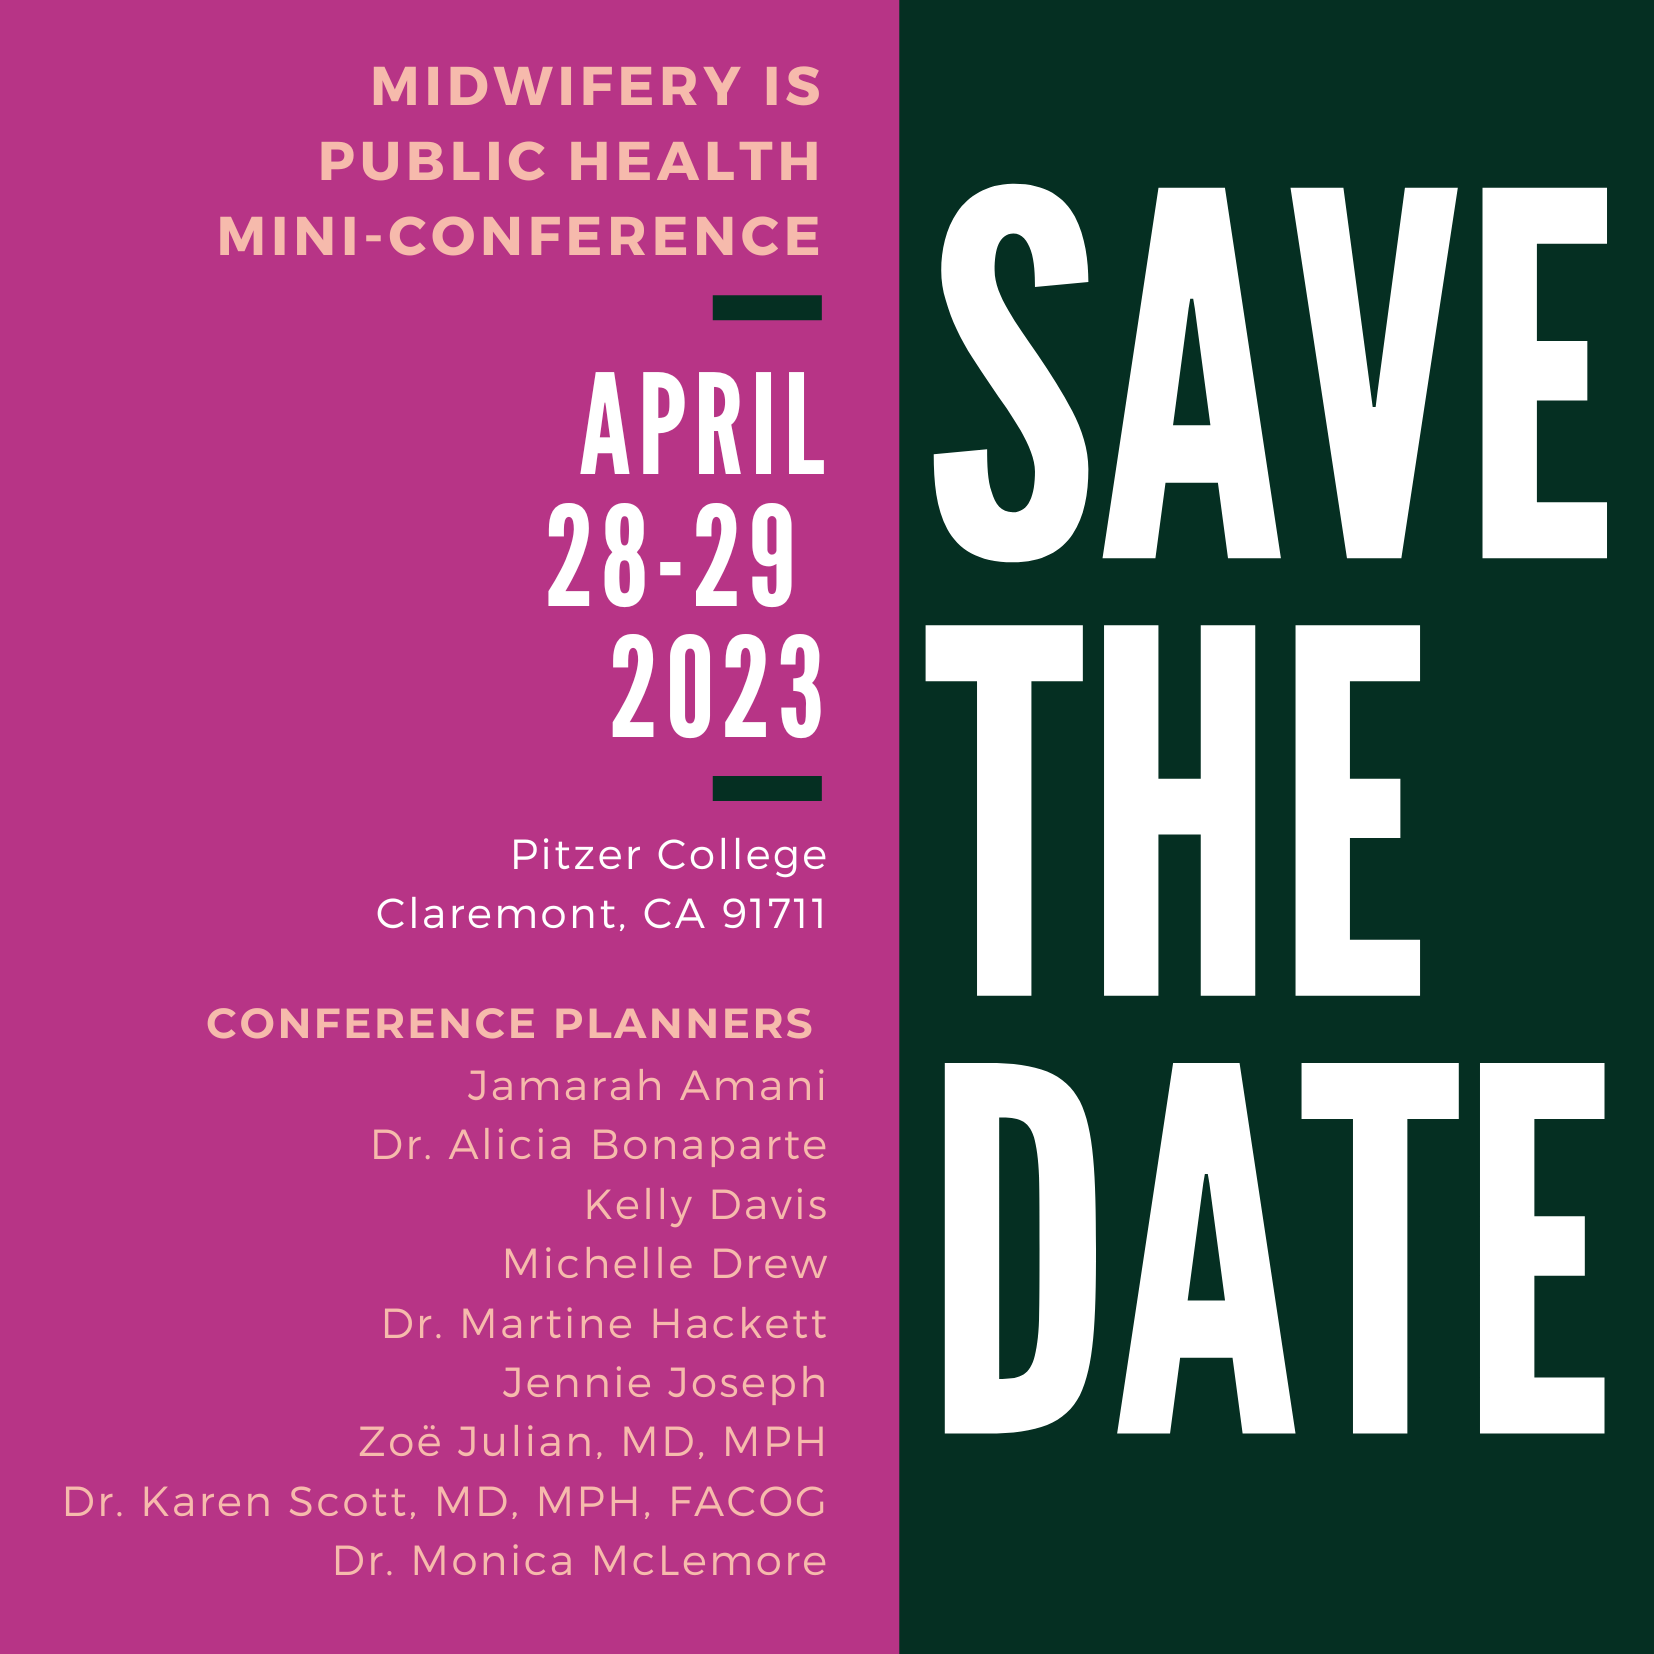 Save the Date for the Midwifery is Public Health conference